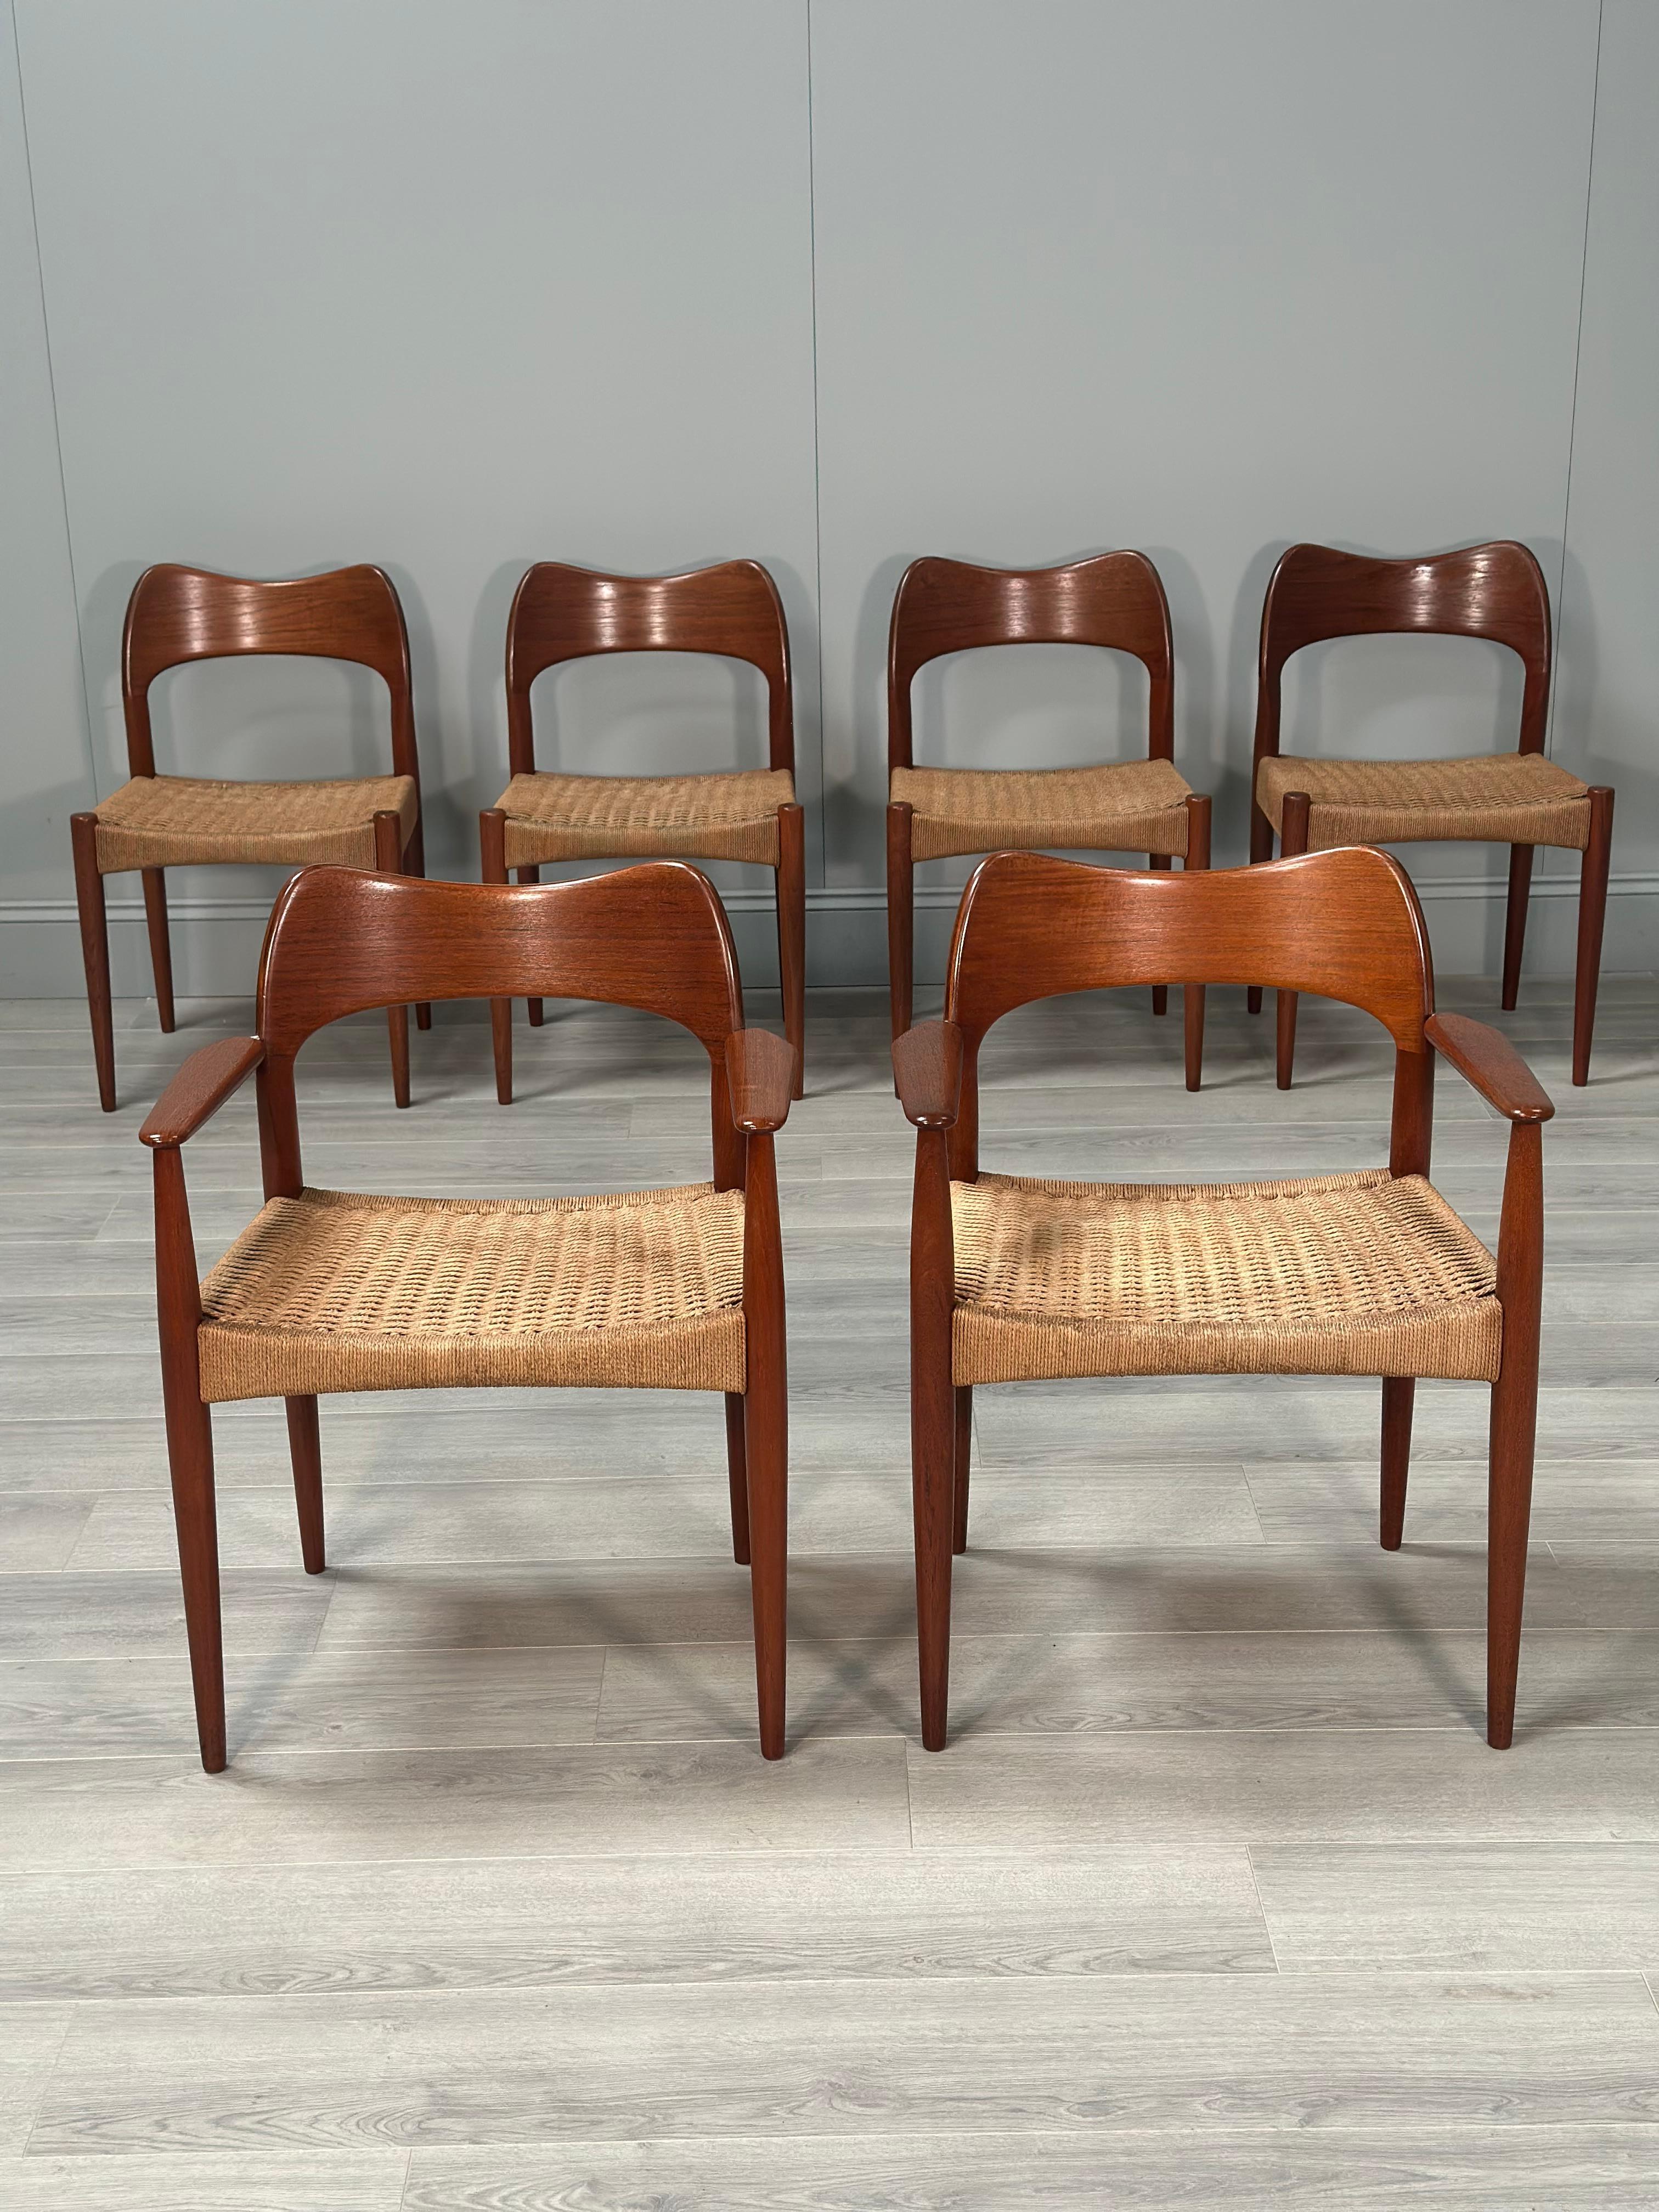 A set of six Danish teak and paper cord dining chairs designed by Arne Hovmand Olsen for Mogens Kold dating to the 1960s. This set also includes a rare pair of carver chairs rarely seen on the market. An iconic set of chairs with a curved teak back